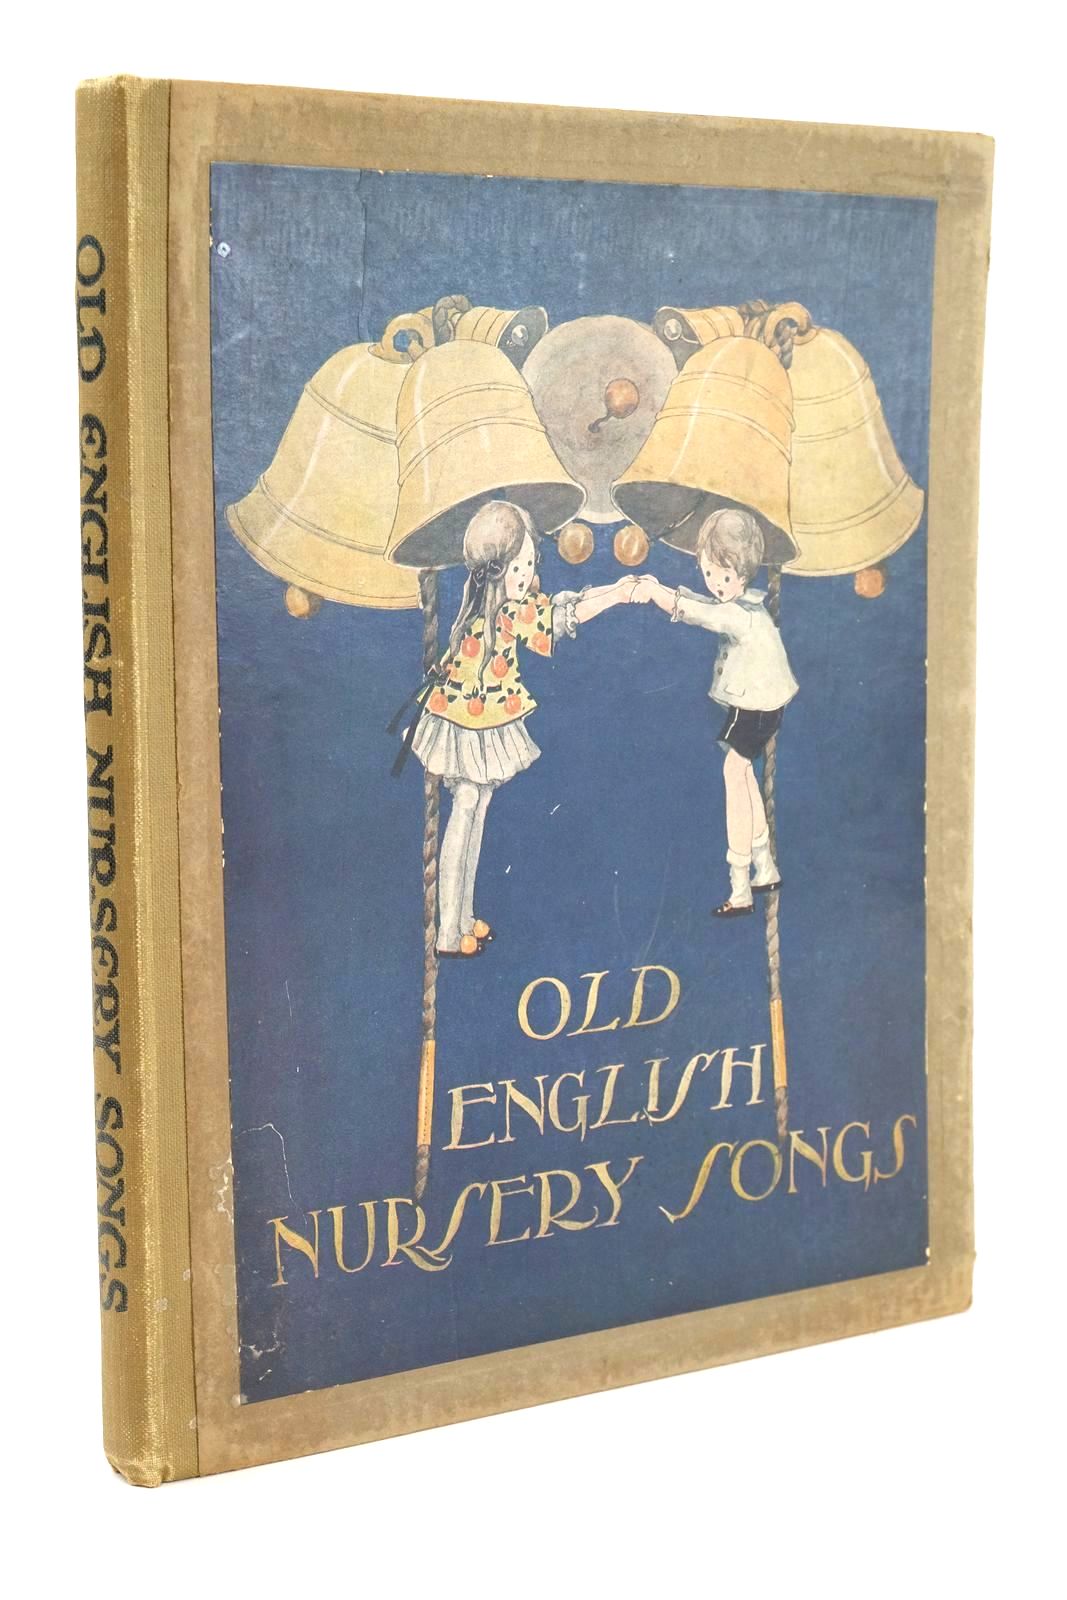 Photo of OLD ENGLISH NURSERY SONGS- Stock Number: 1324627